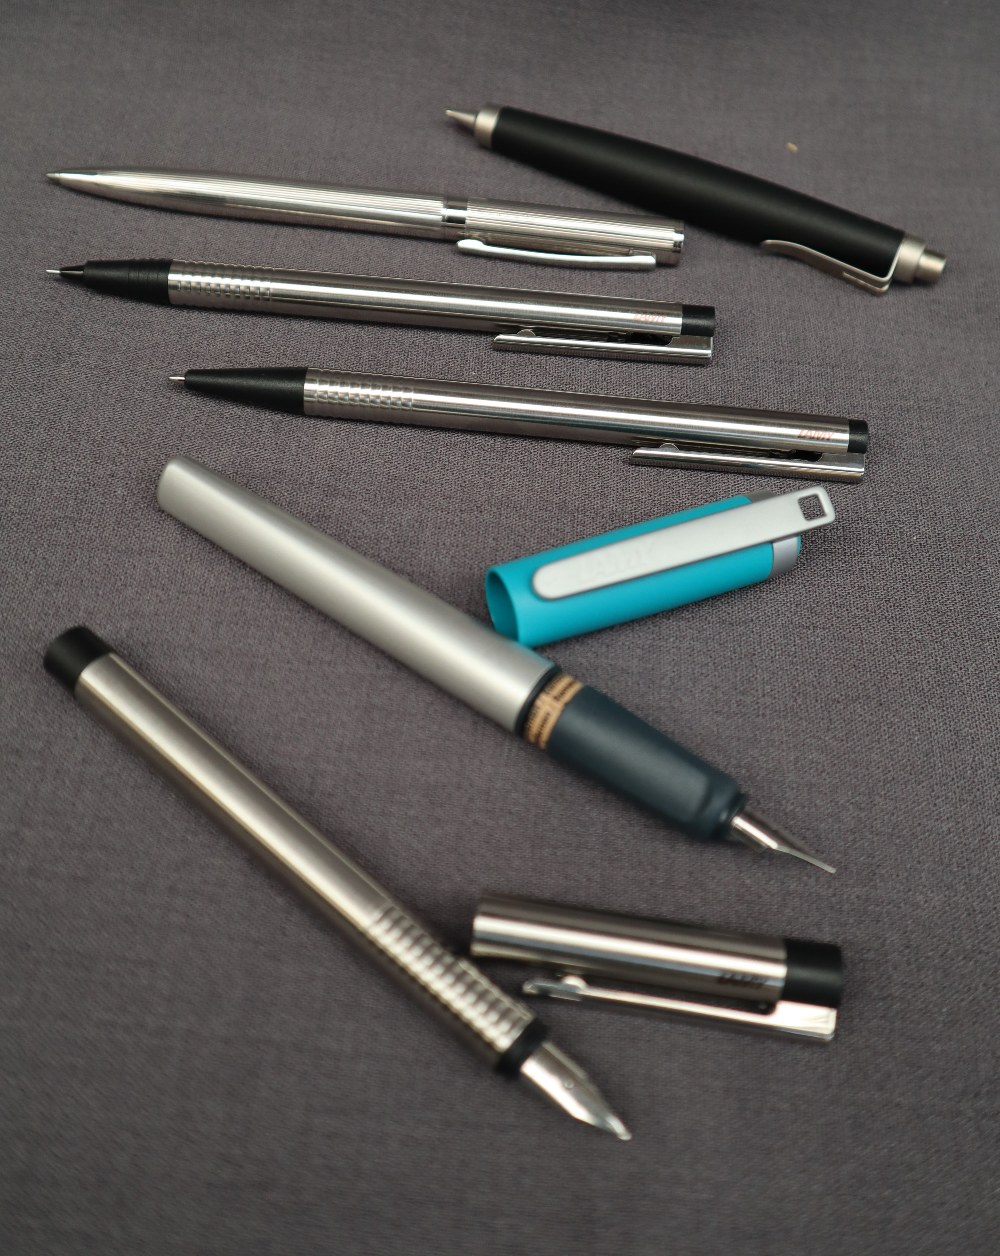 Two Lamy fountain pens together with two Lamy ballpoint pens, - Image 3 of 3